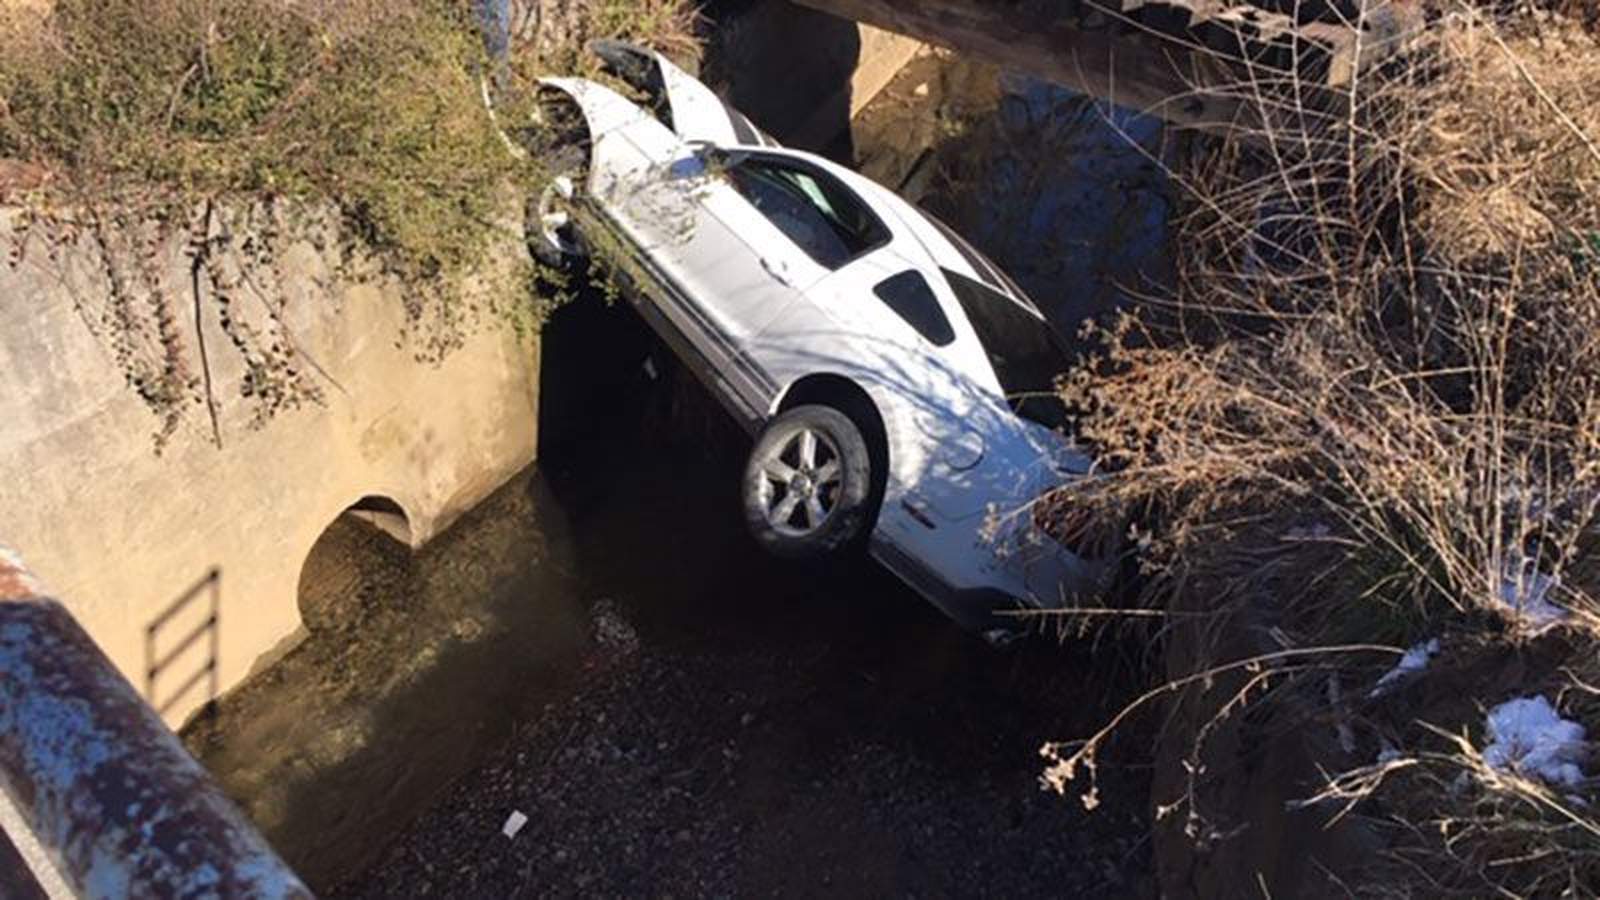 Police chase ends as Mustang lands in Roanoke drainage ditch, police say